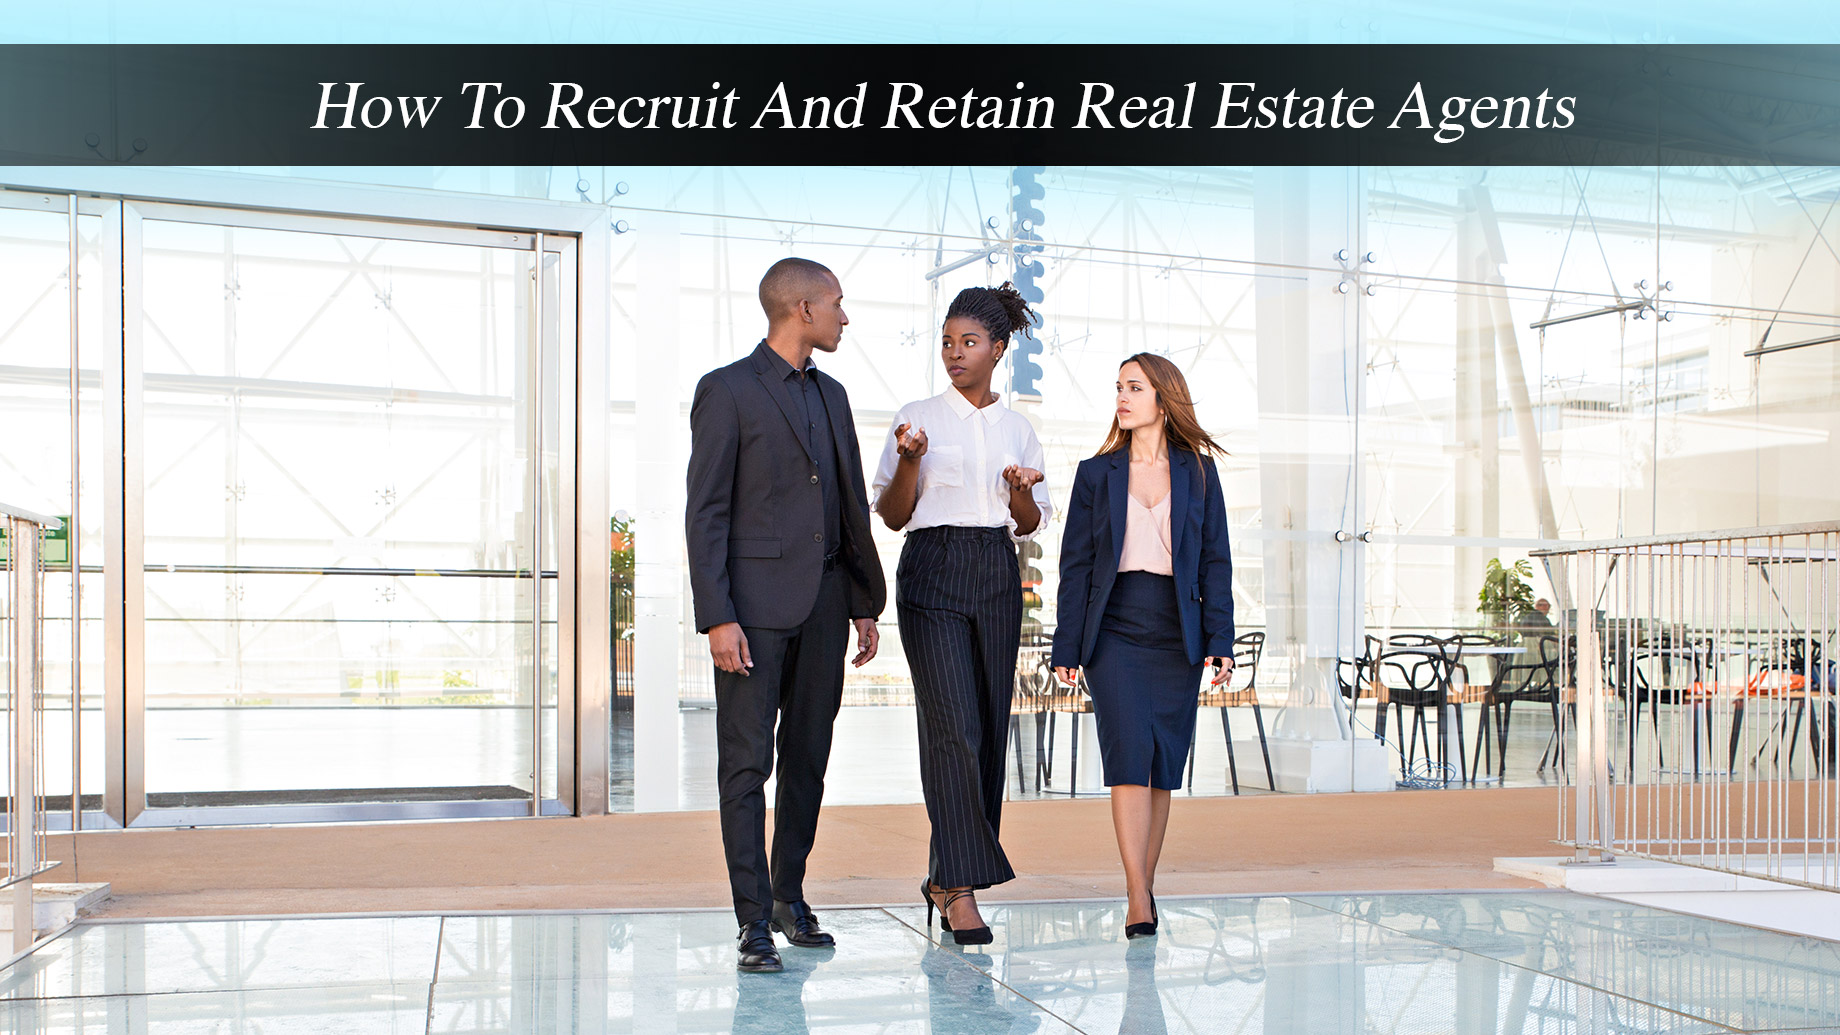 How To Recruit And Retain Real Estate Agents